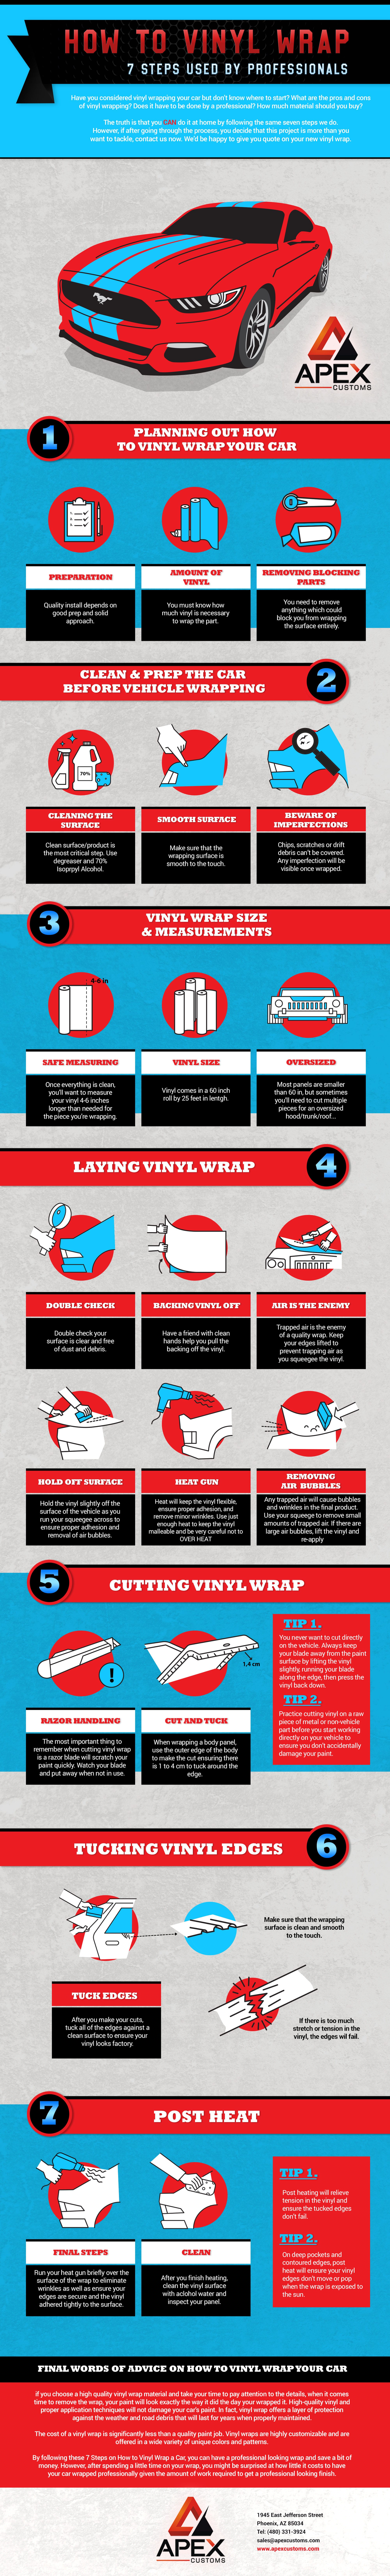 How To Vinyl Wrap: 7 Steps Used by Professionals